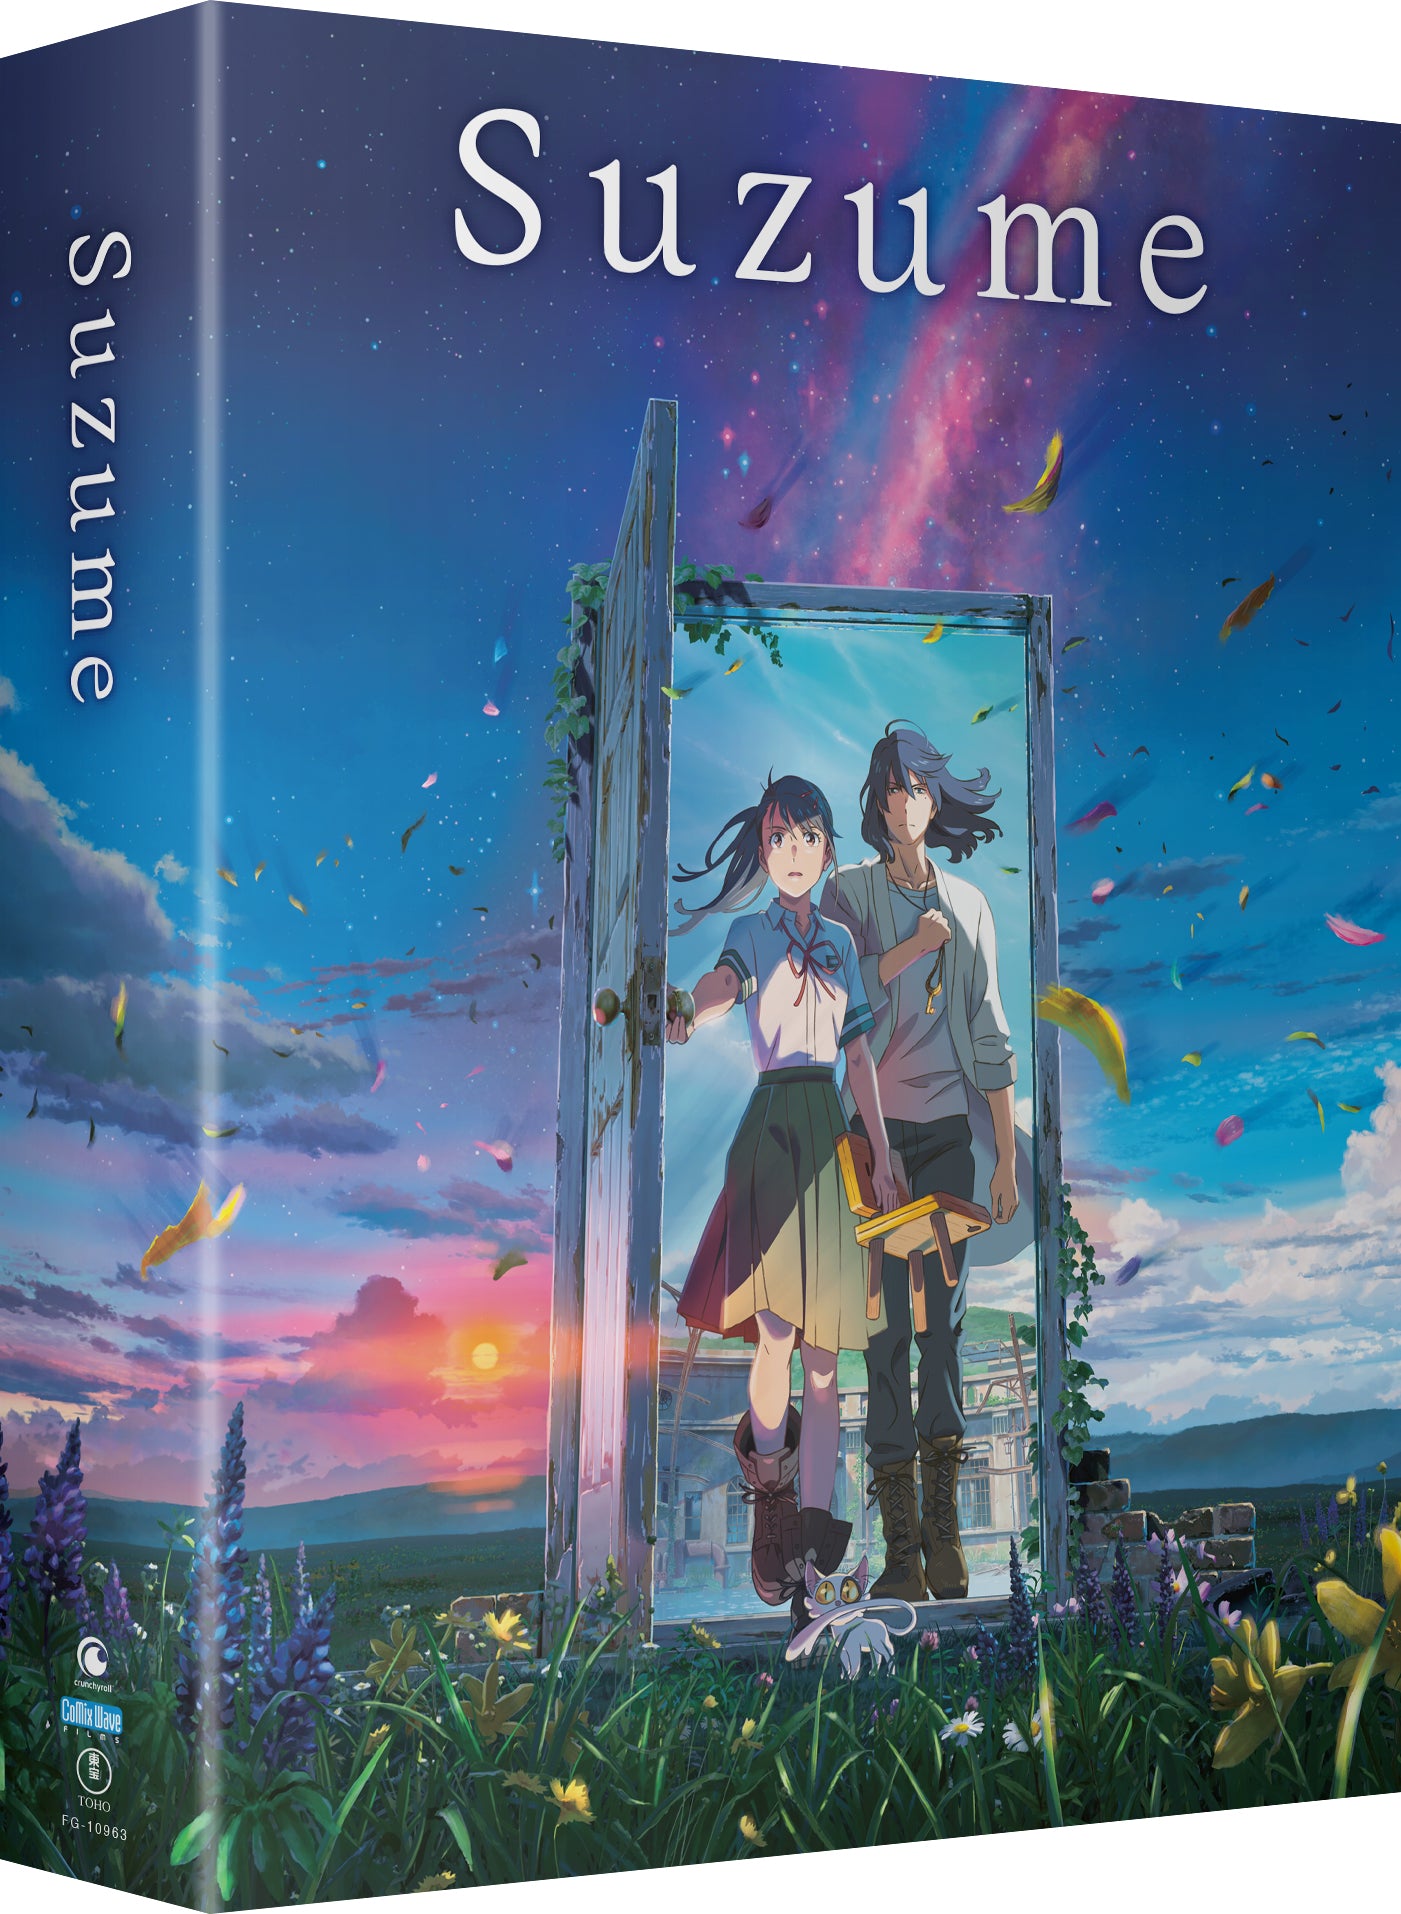 Suzume Crunchyroll Release Date Set for Your Name Director's